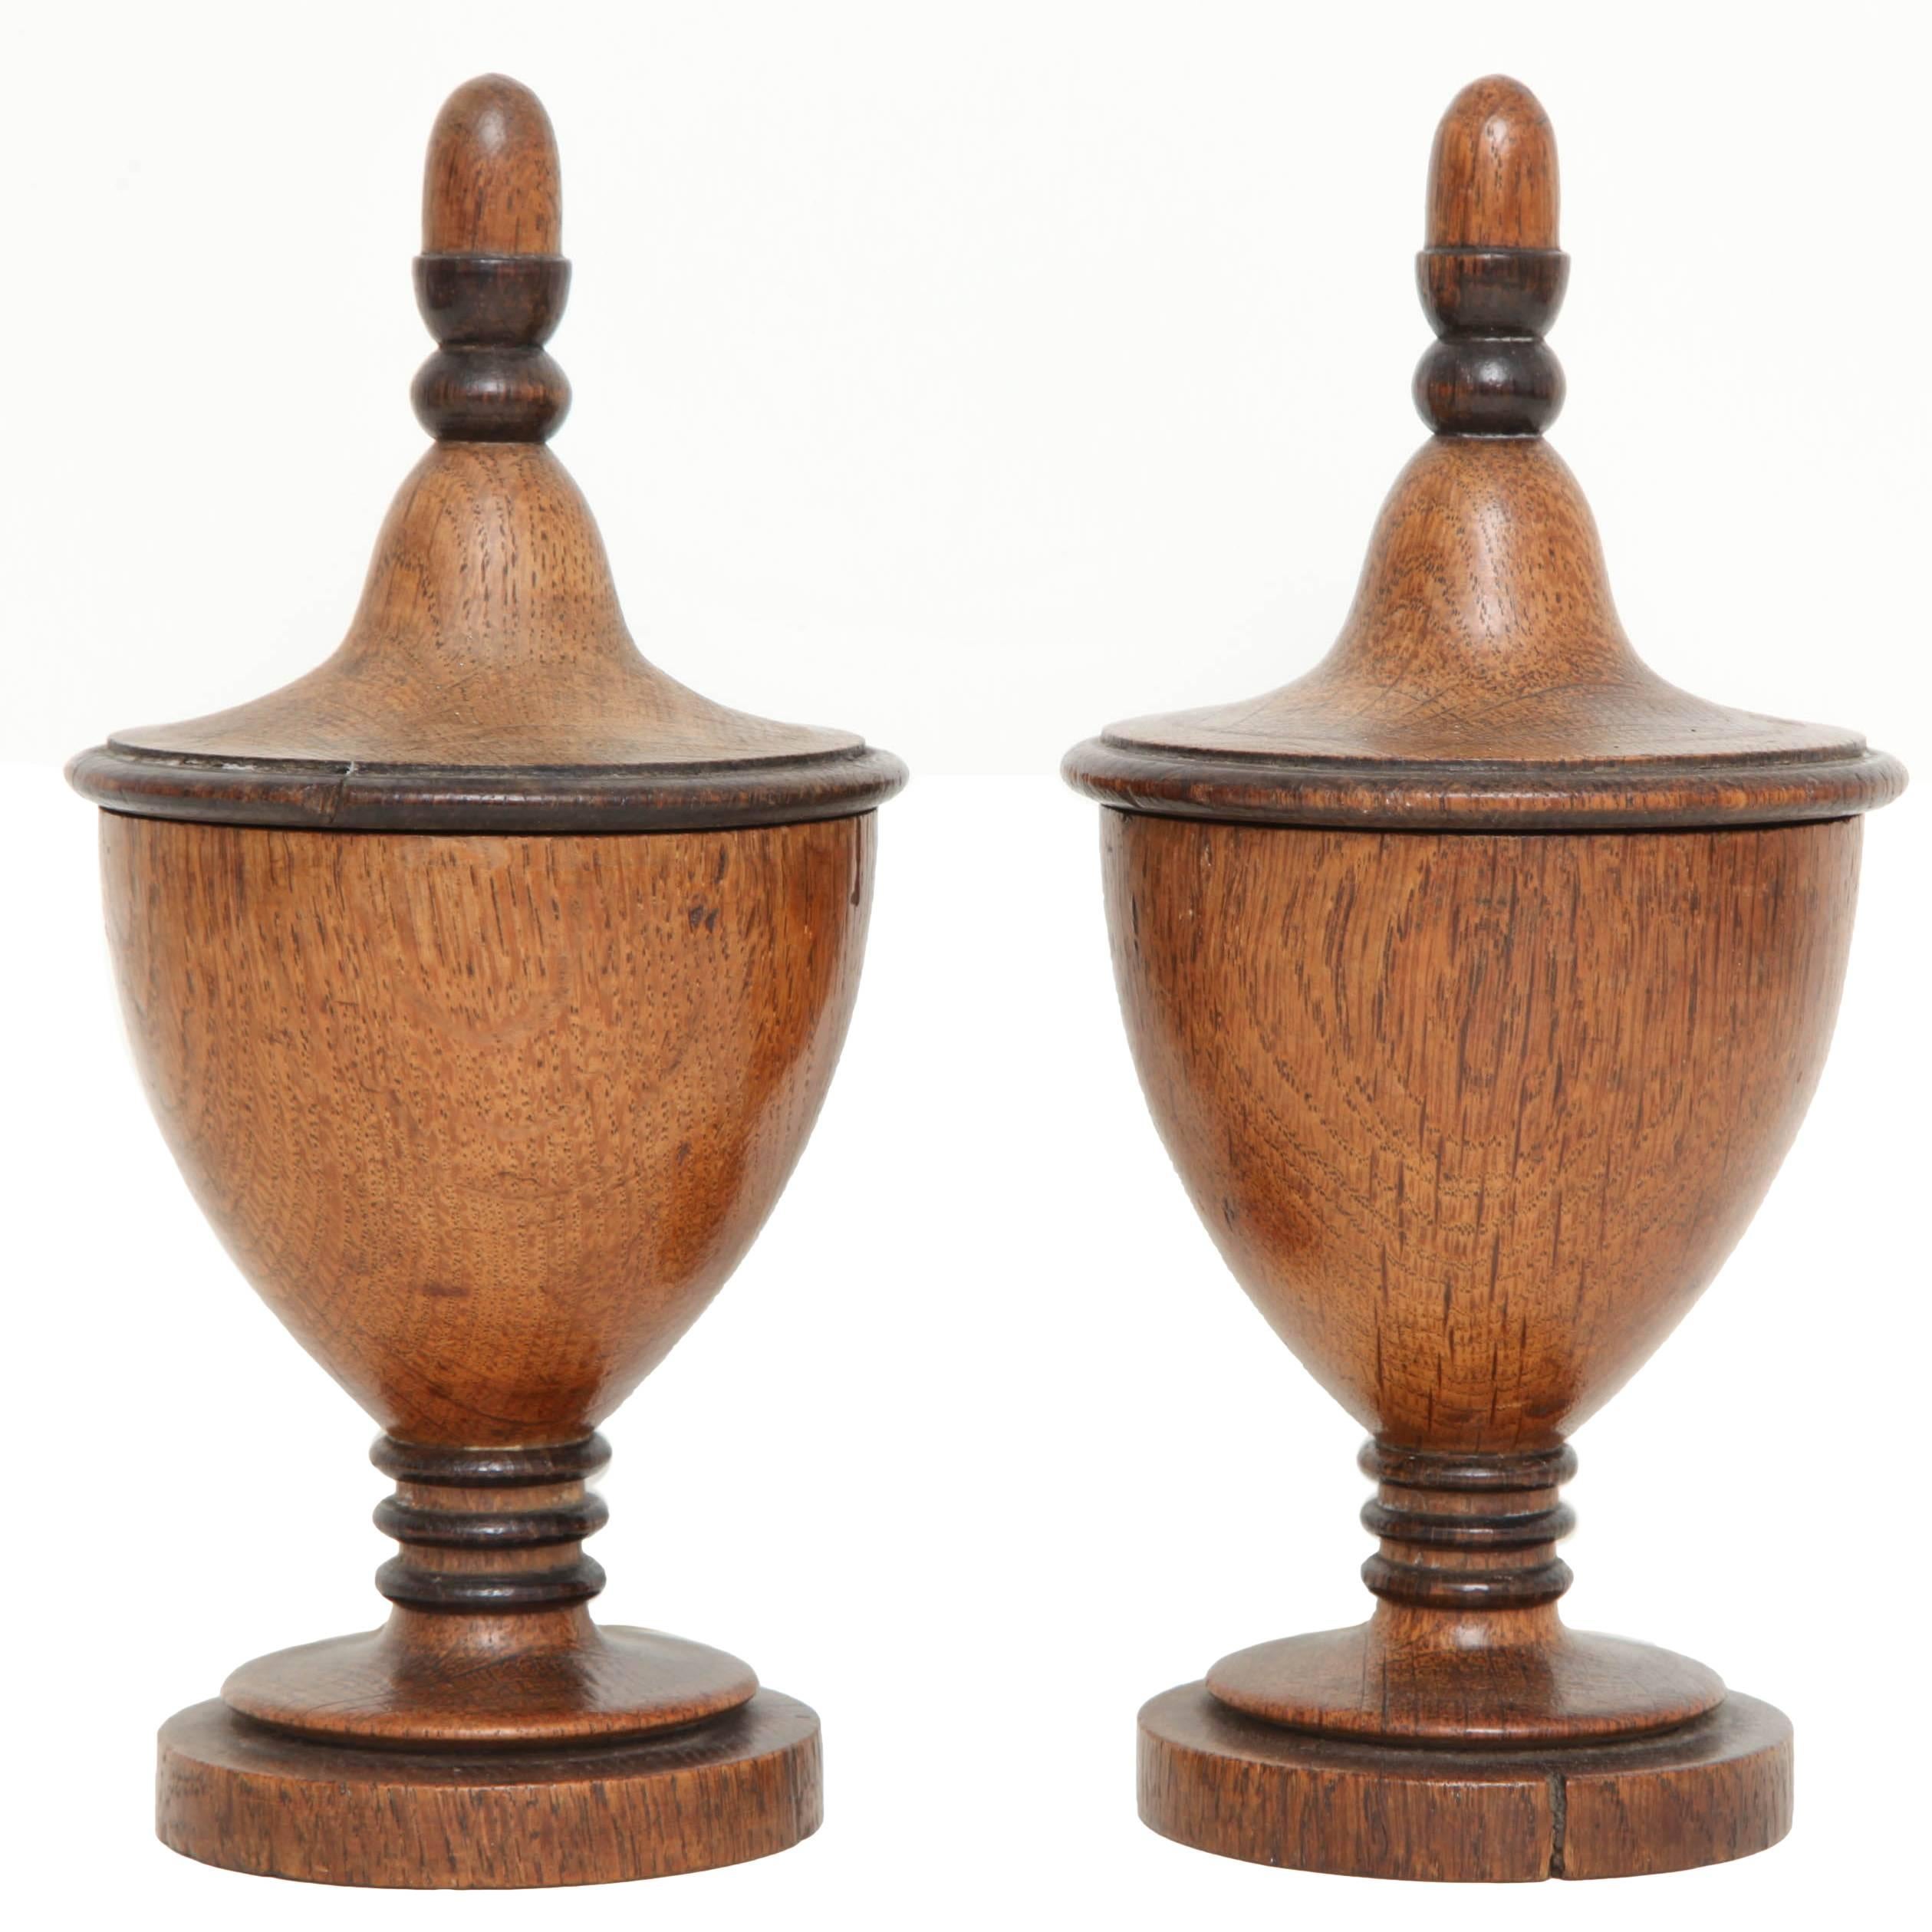 A Pair of Early 19th Century English Neoclassocal Urns